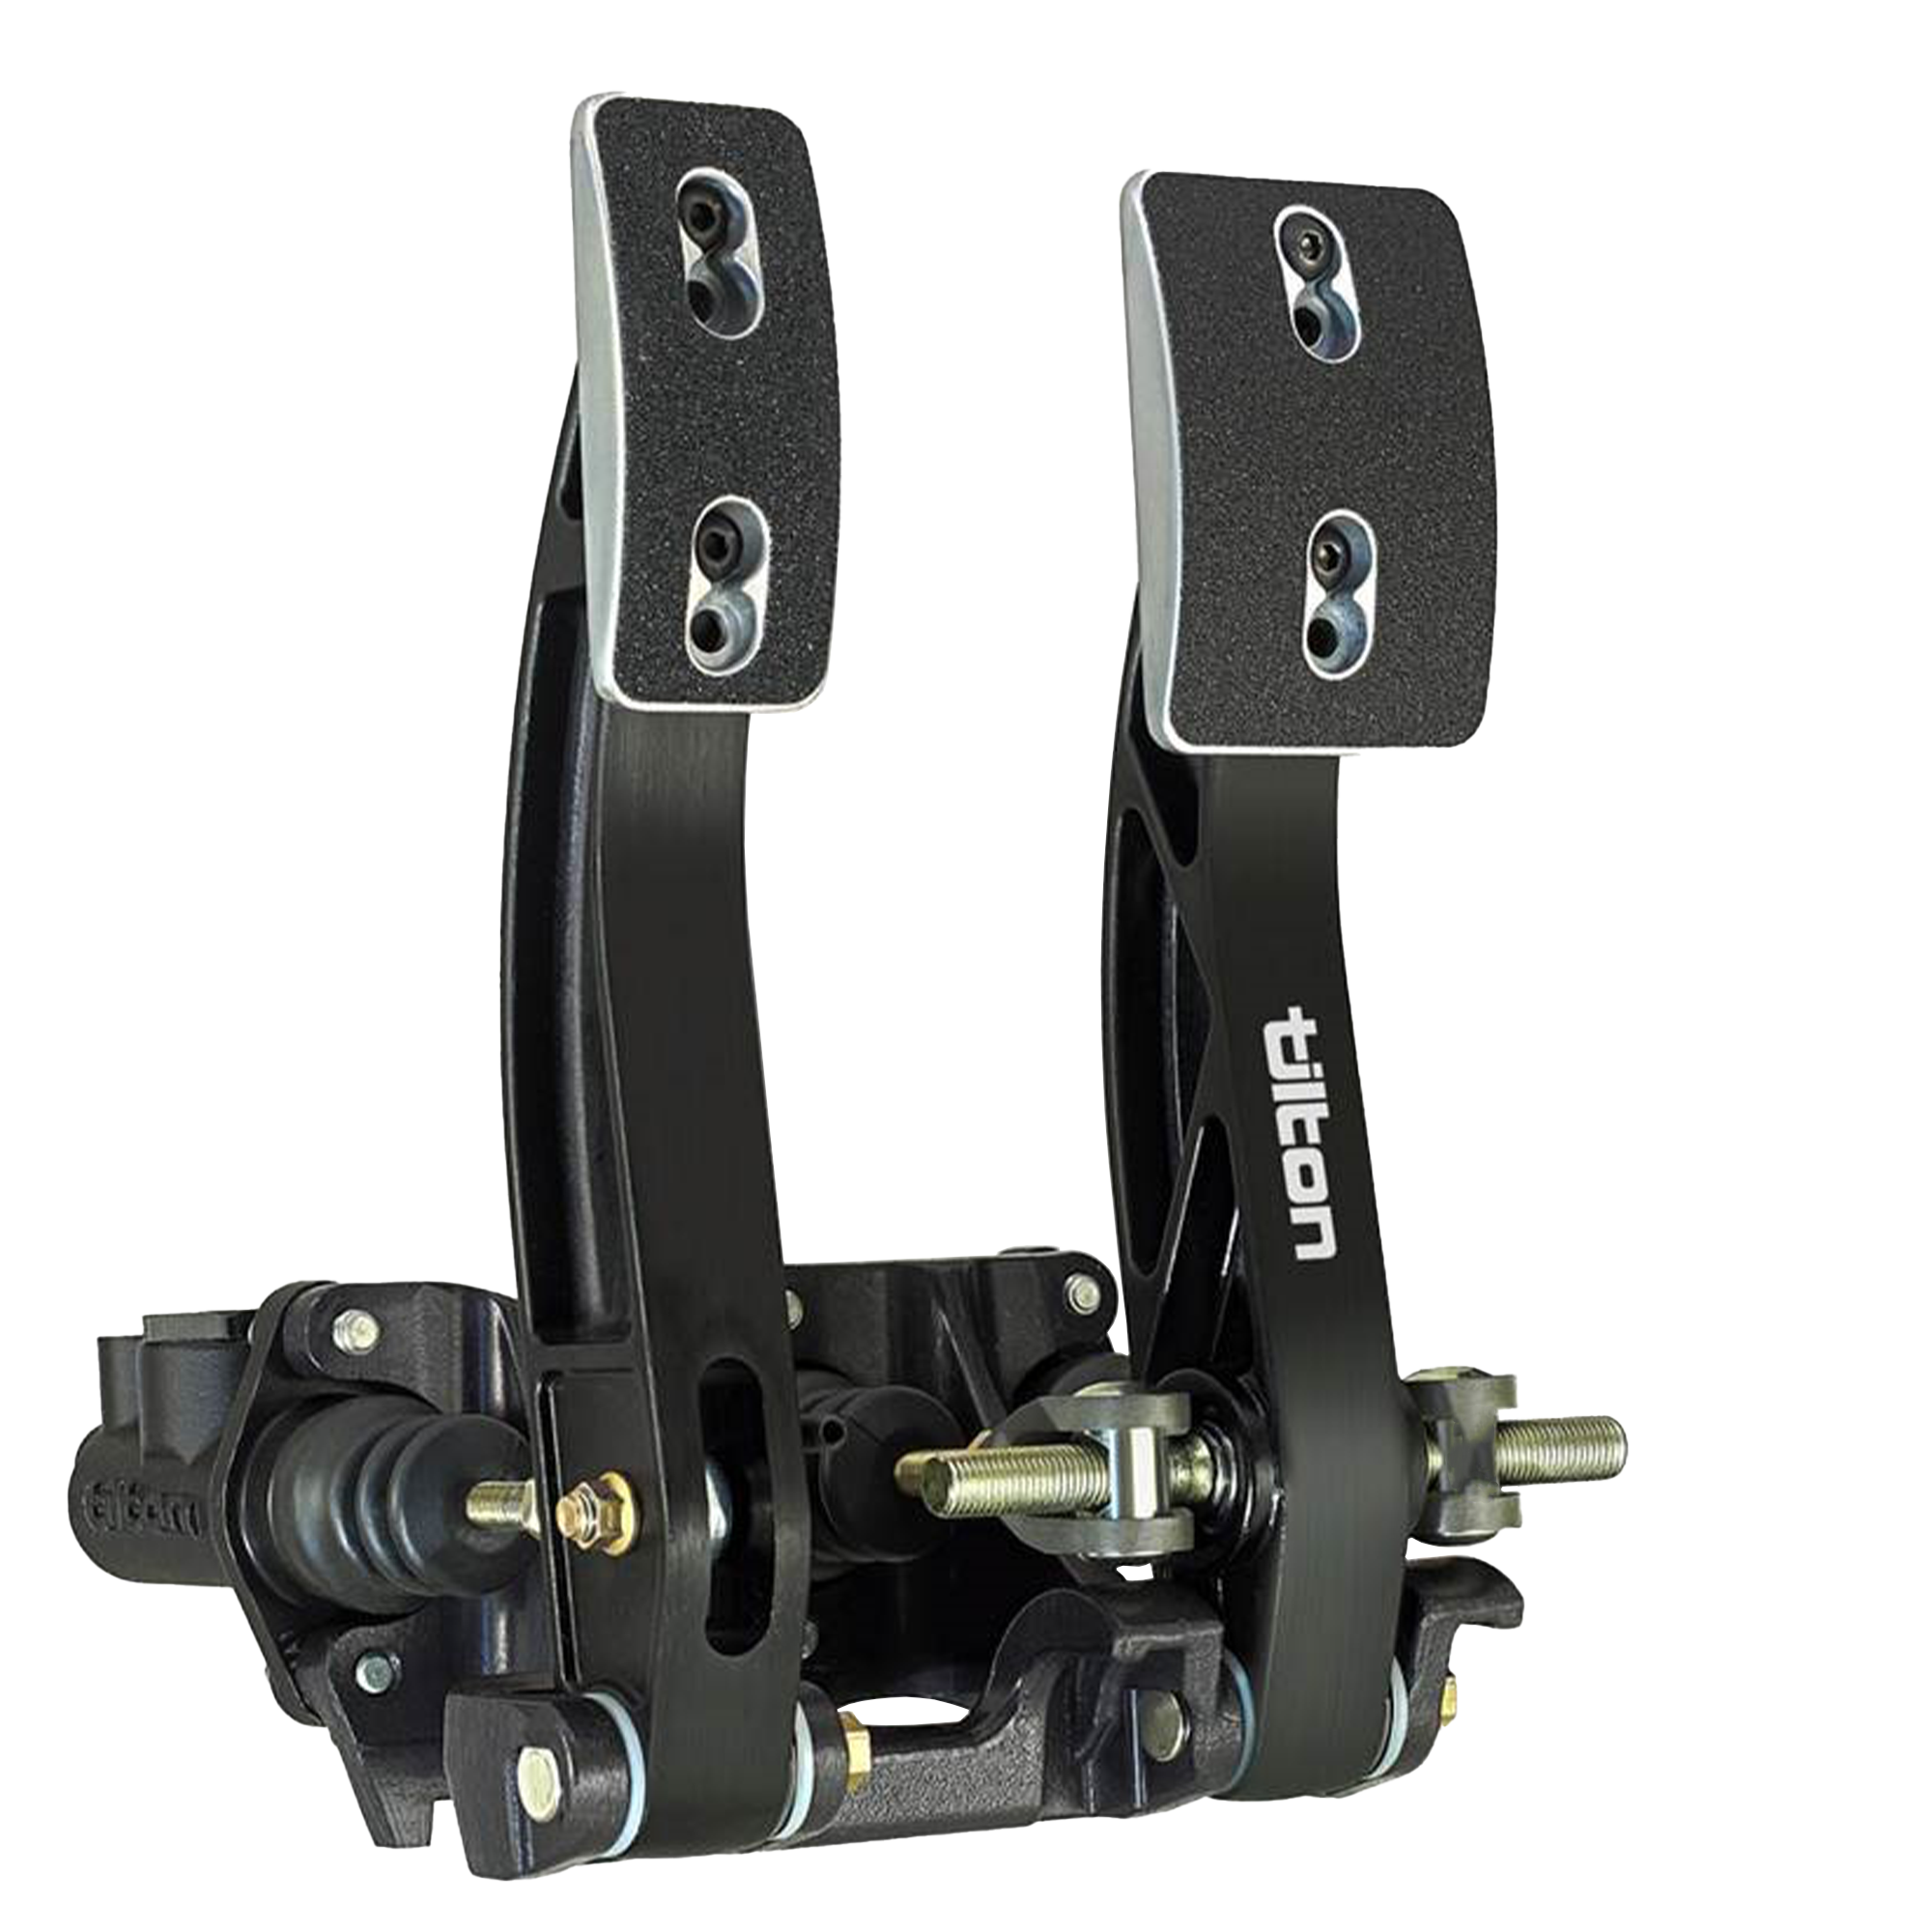 Tilton 600-Series Floor Mounted Pedal Assembly - JOES Racing Products